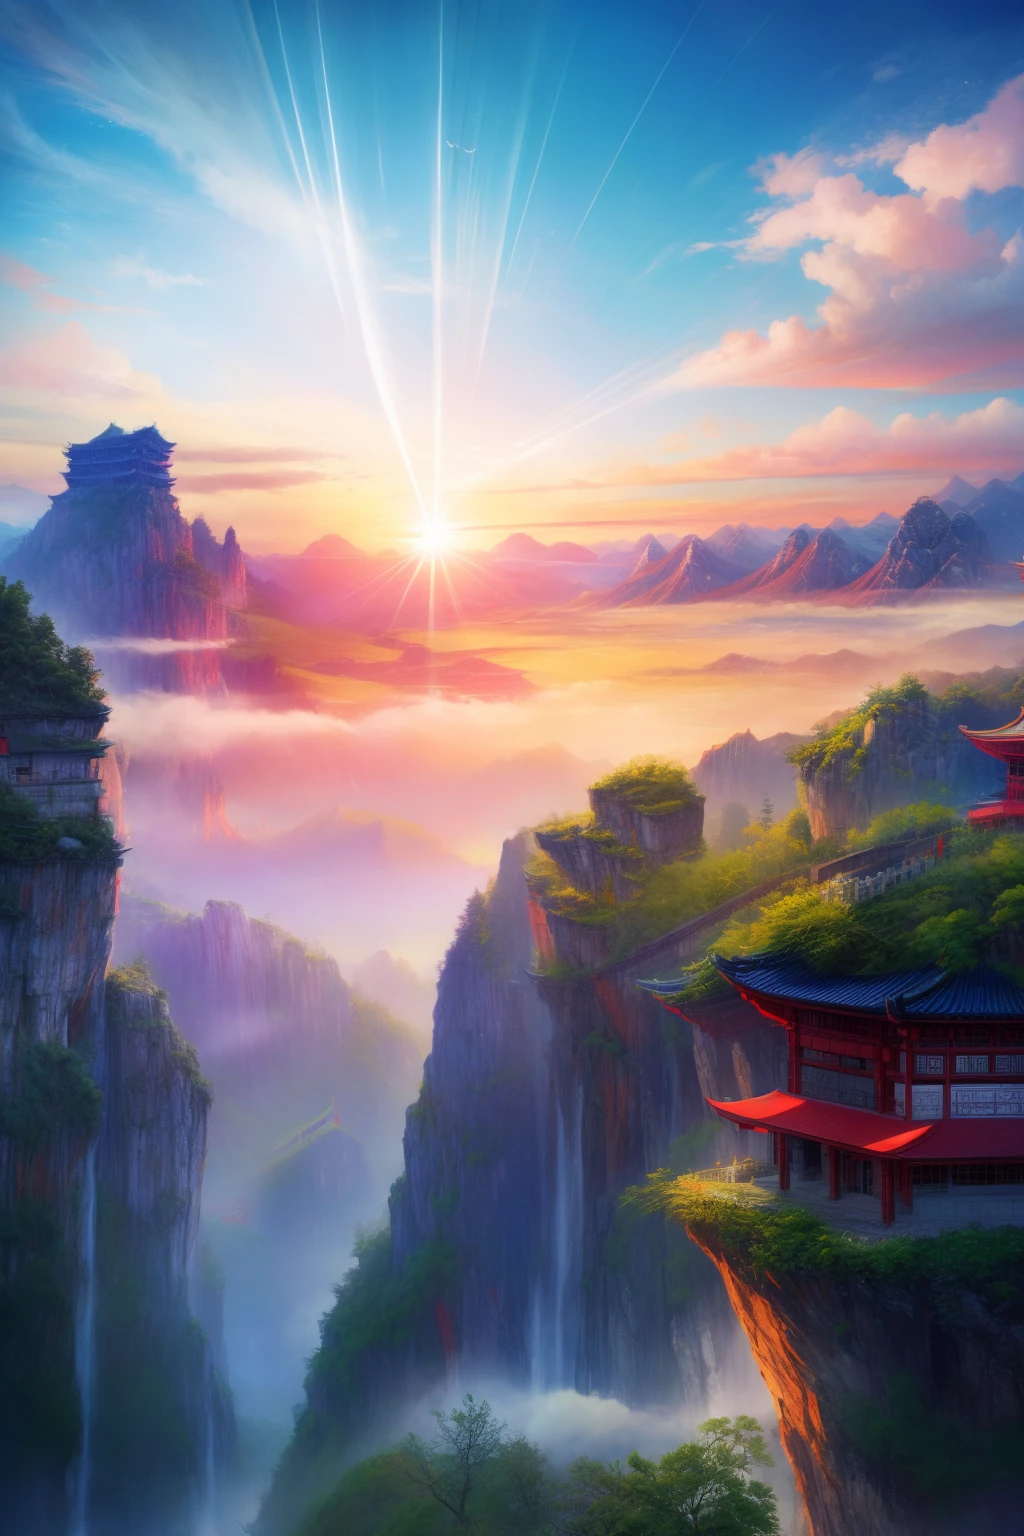 There is a small red building on the mountain, author：Cheng Jiasui, Chinese landscape, author：Yuan Jiang, an amazing landscape image, zhangjiajie in early morning, author：Liu Haisu, by Raymond Han, breathtaking mountains, author：Xia Yong, Floating mountains, Incredibly beautiful, By Ren Xiong, zhangjiajie national forest park